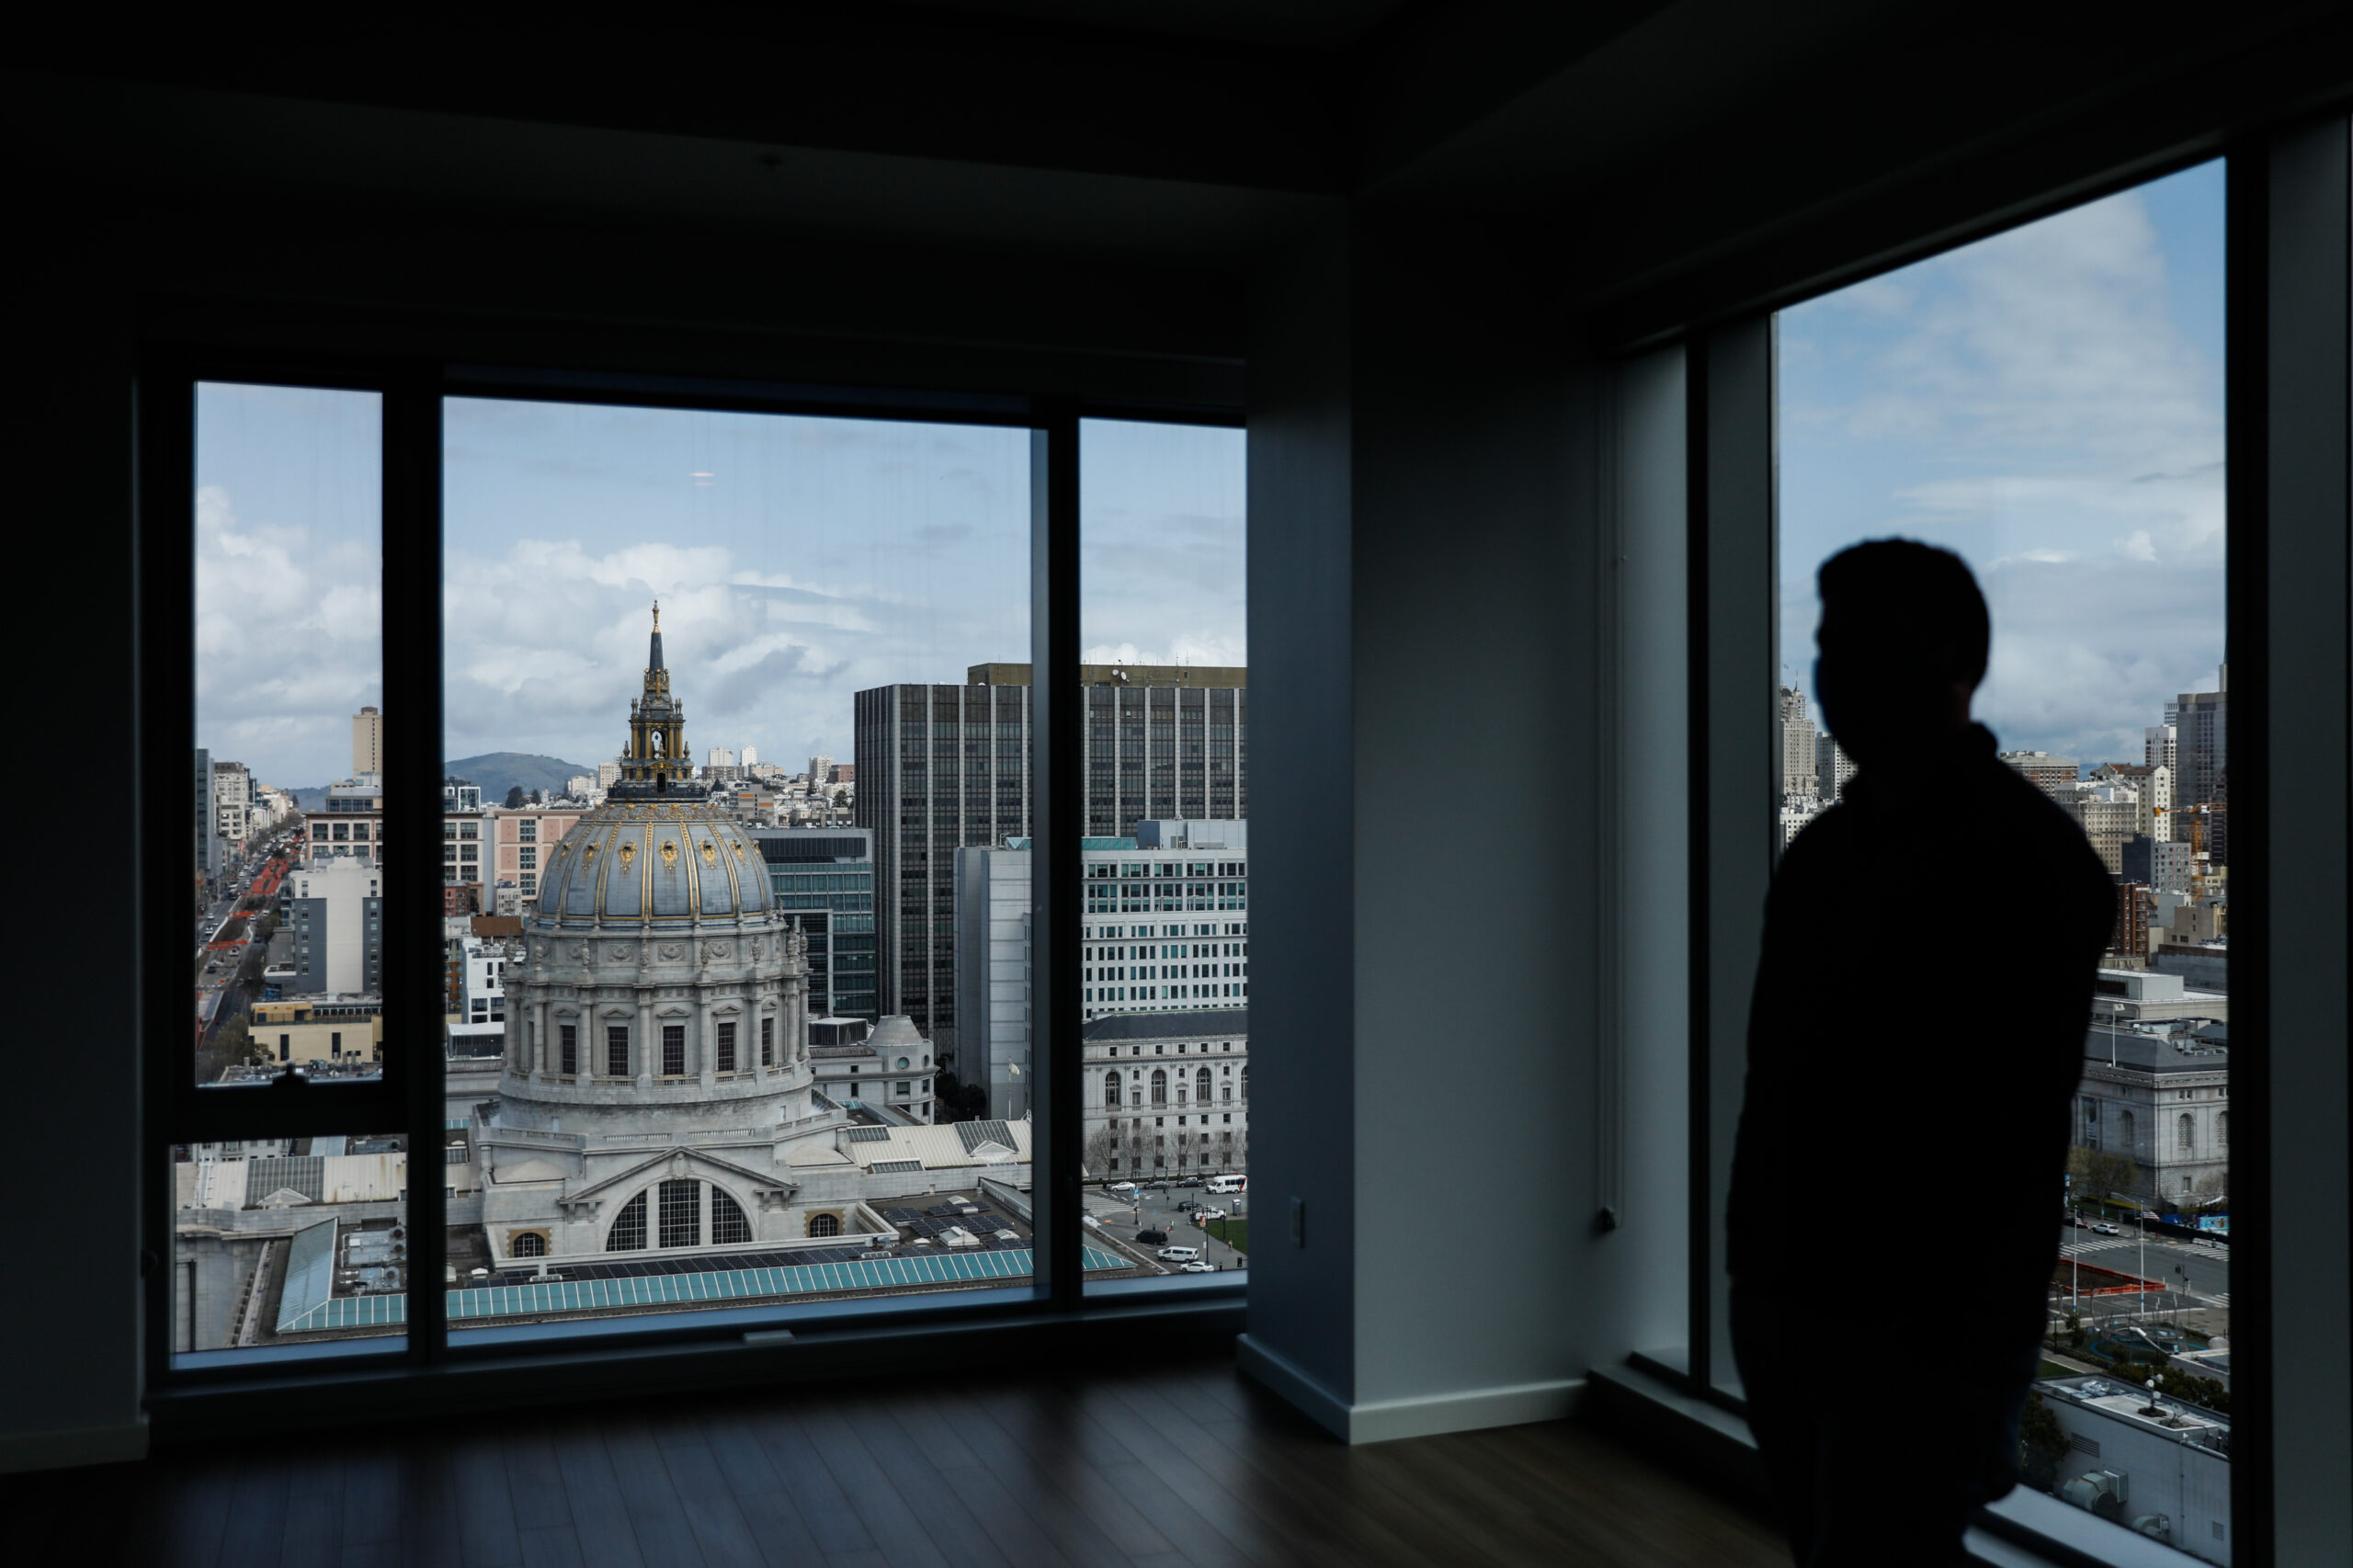 A silhouette of a person stands in a room with a large window, overlooking a cityscape with a domed building.